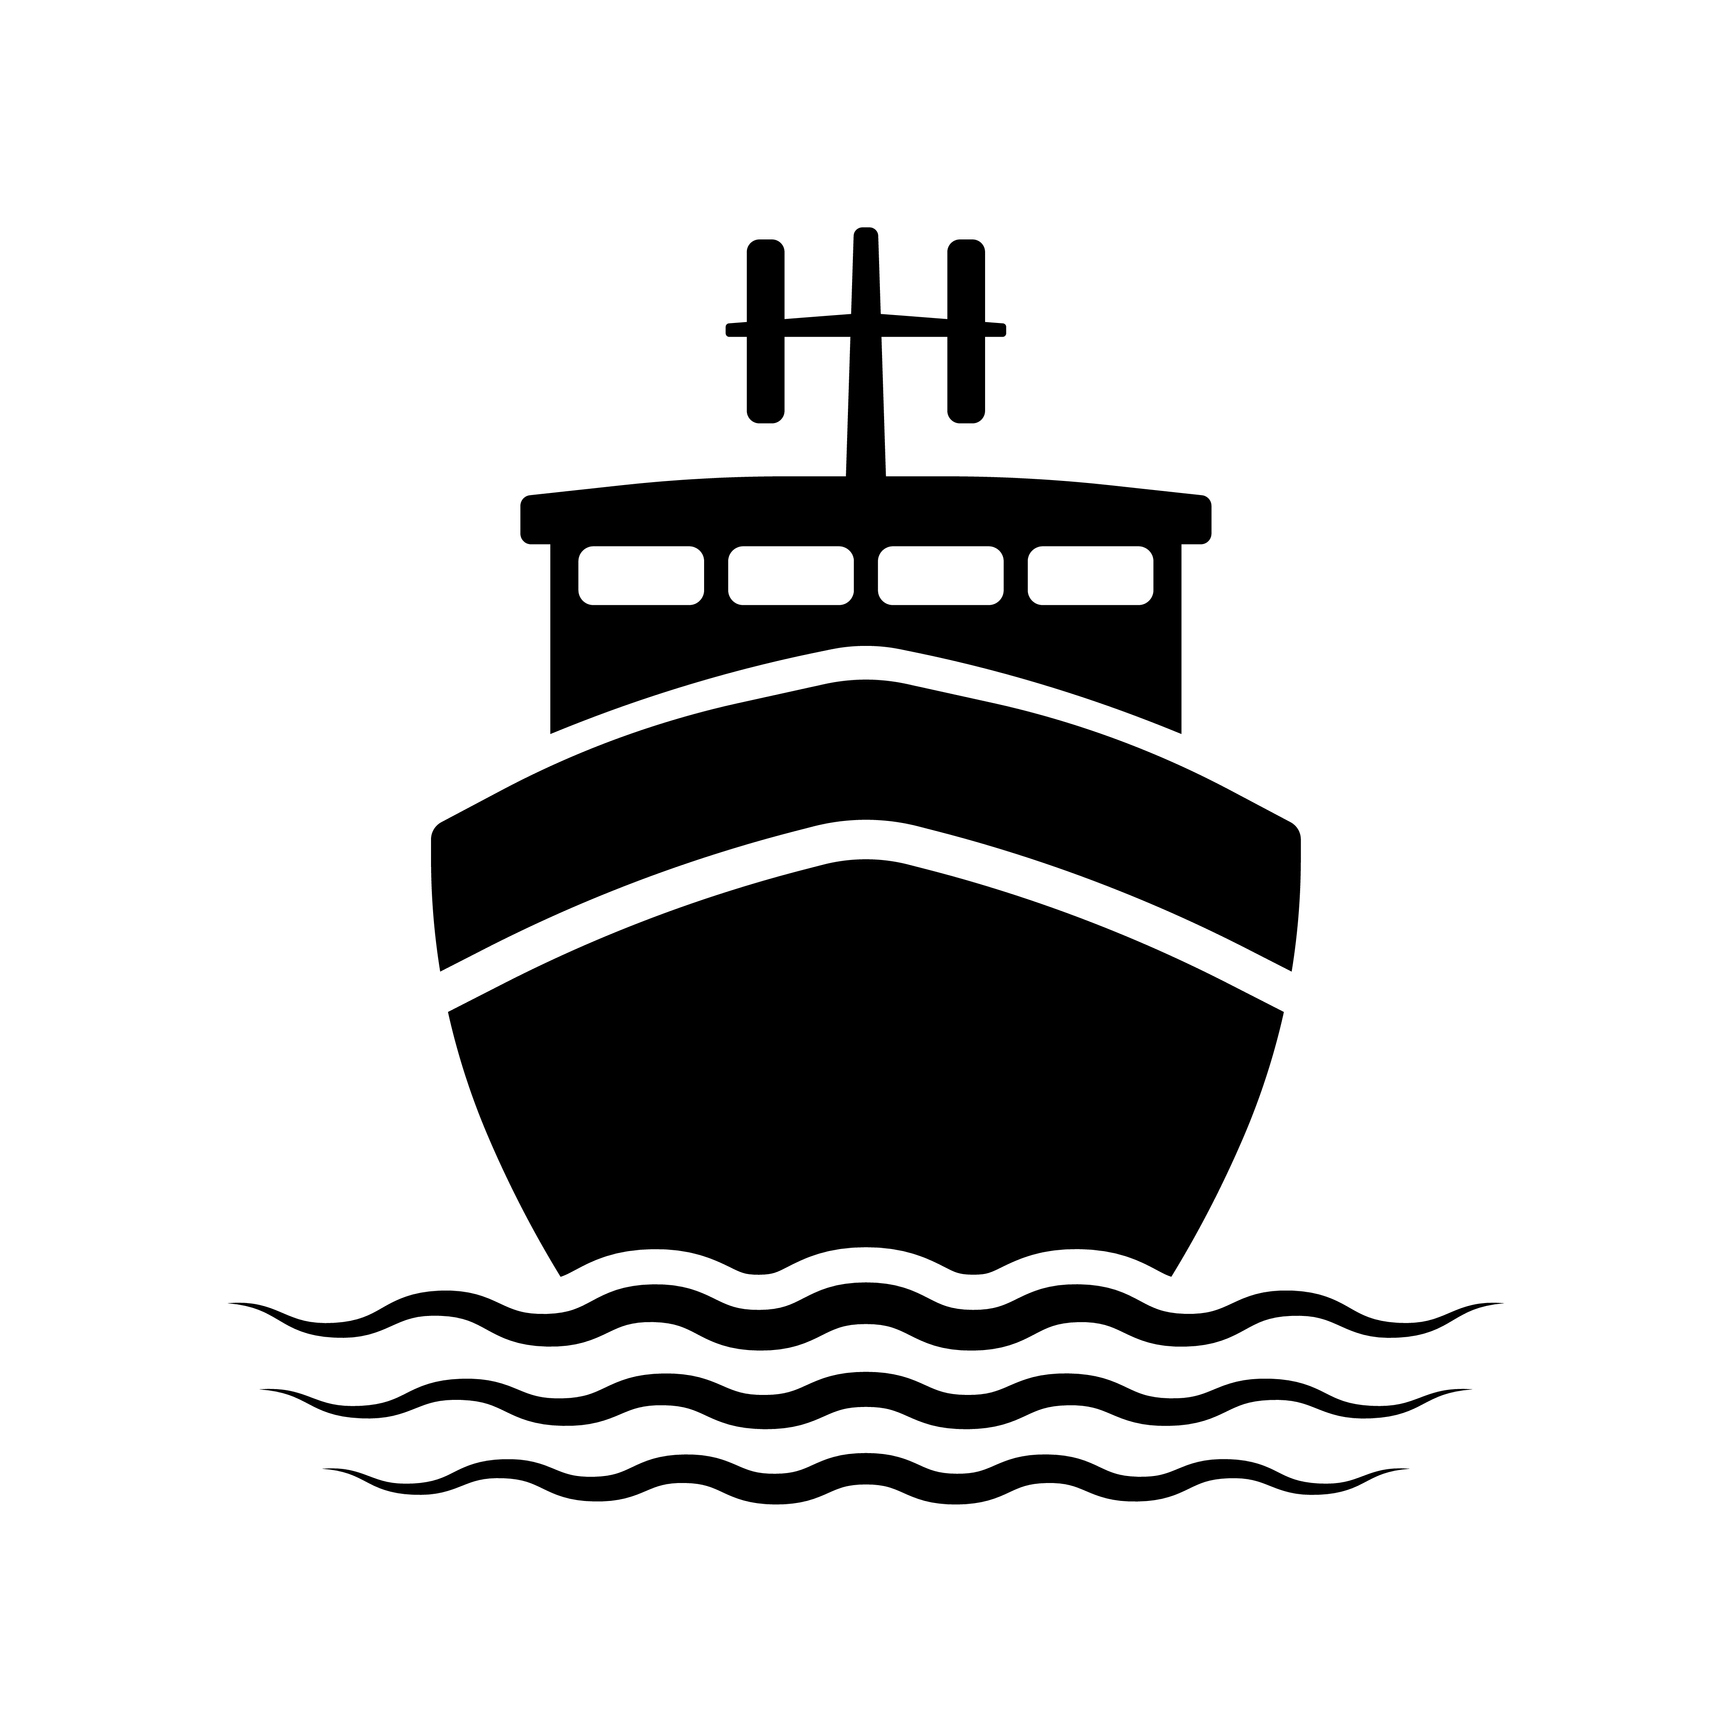 Ship Icon. Fishing Boat. Black Silhouette. Front View. Vector Flat Graphic Illustration. The Isolated Object On A White Background. Isolate.